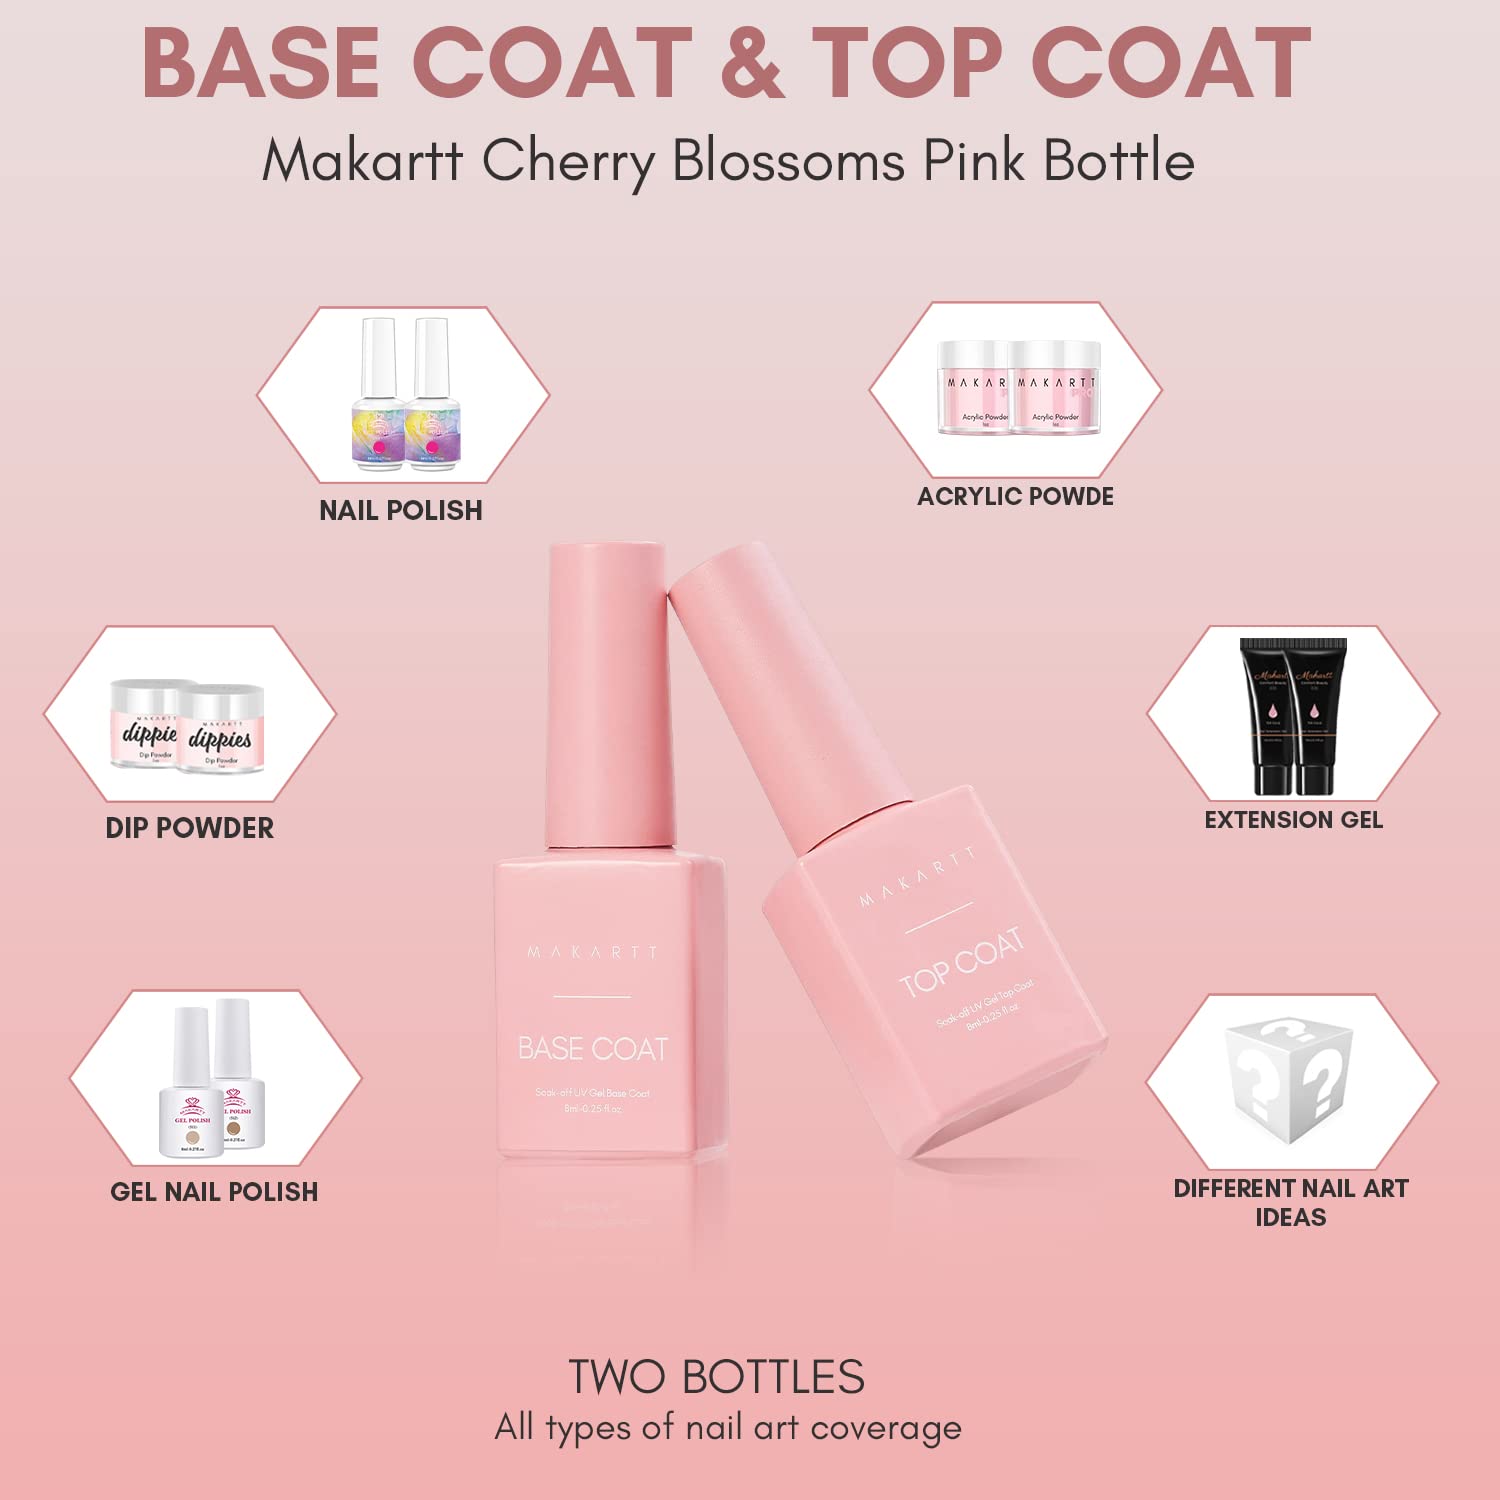 Top Coat and Base Set, No Wipe Clear (8ML/each)